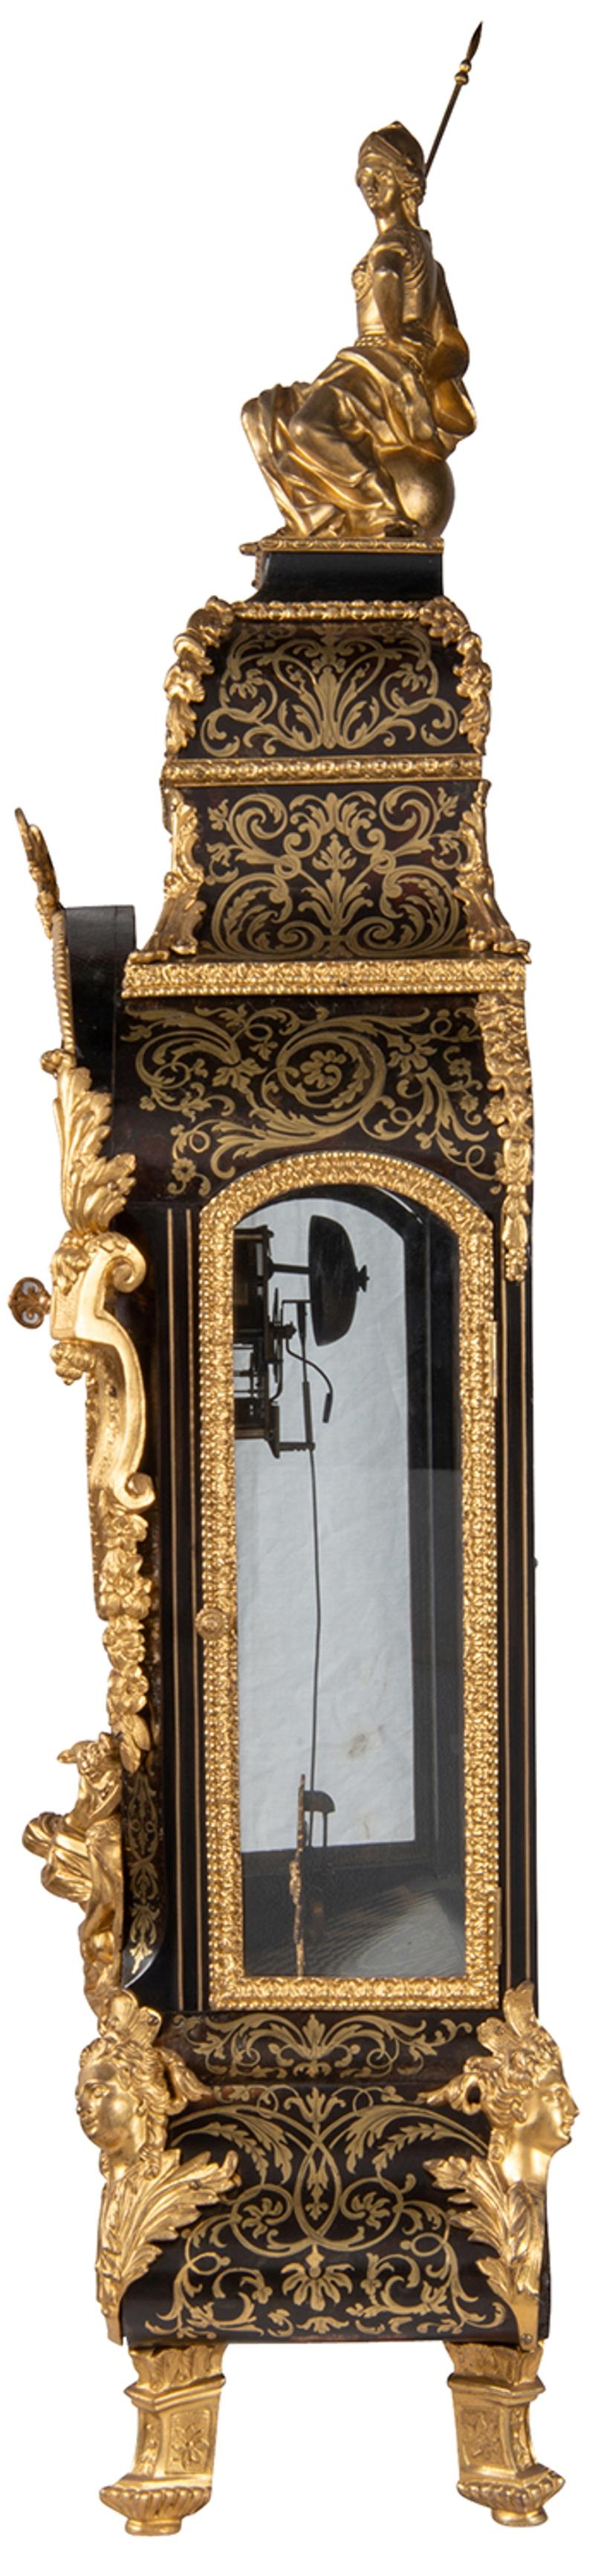 19th Century French Boulle Mantel Clock For Sale 4